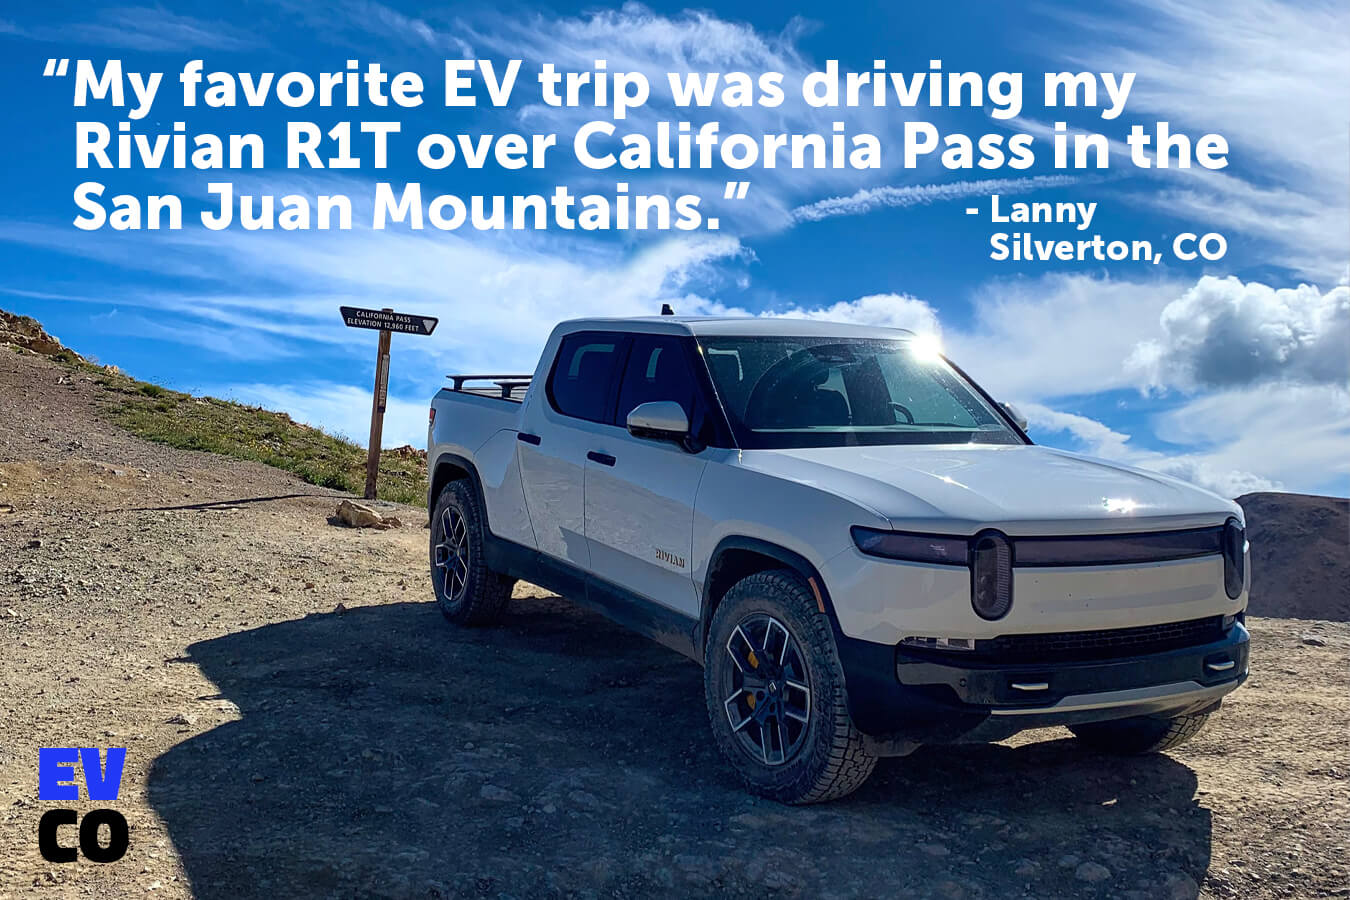 Quote saying "My favorite EV trip was driving my Rivian R1T over California Pass in the San Juan Mountains," attributed to Lanny, in Silverton, CO. Image of a Rivian R1T on a dirt road.